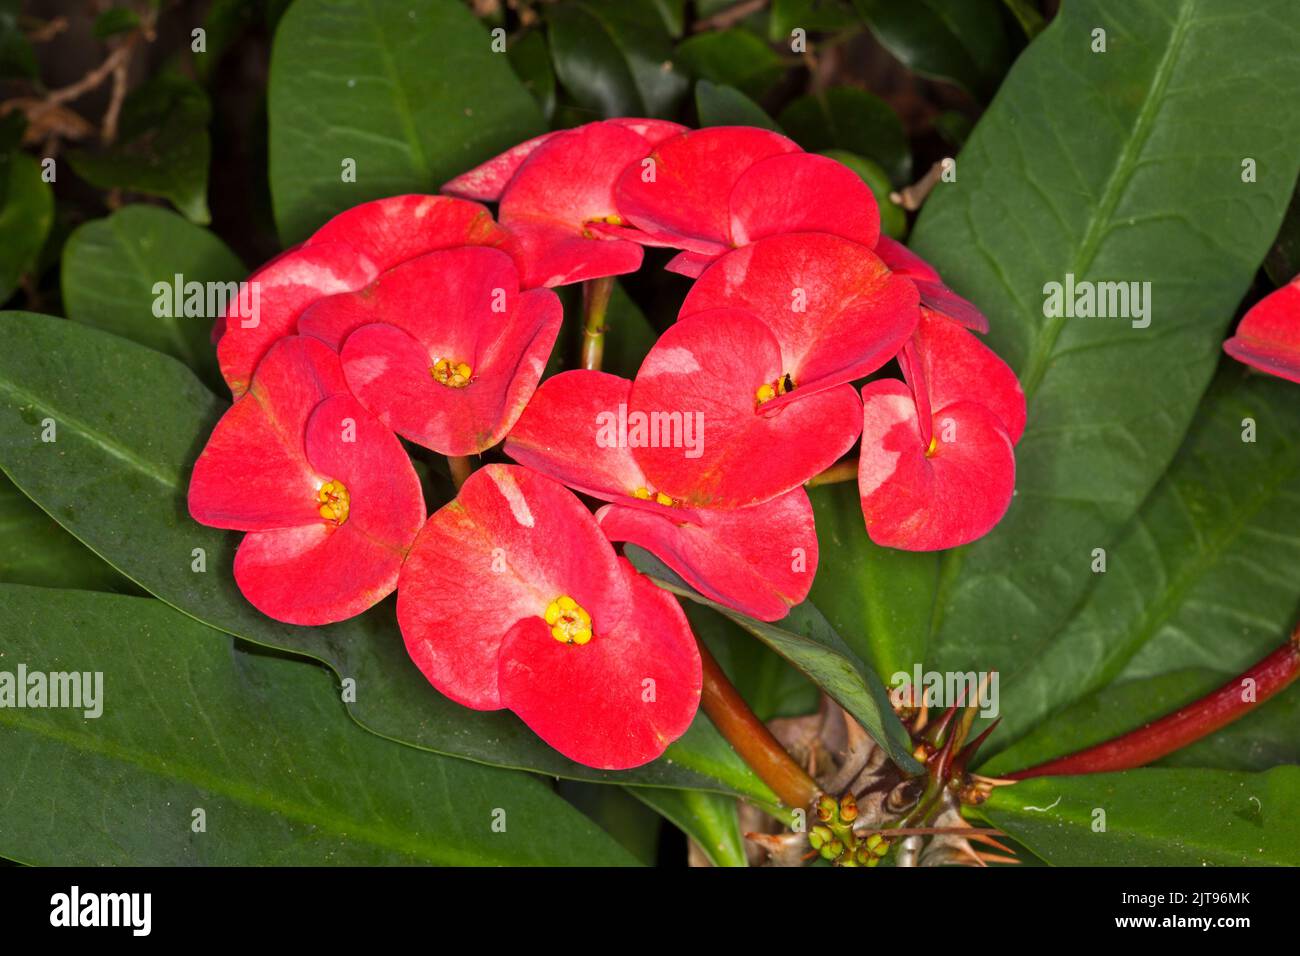 Cluster of large bright red flowers of Euphorbia millii, Rancho collection, a drought-tolerant thorny succulent, on a background of green leaves Stock Photo